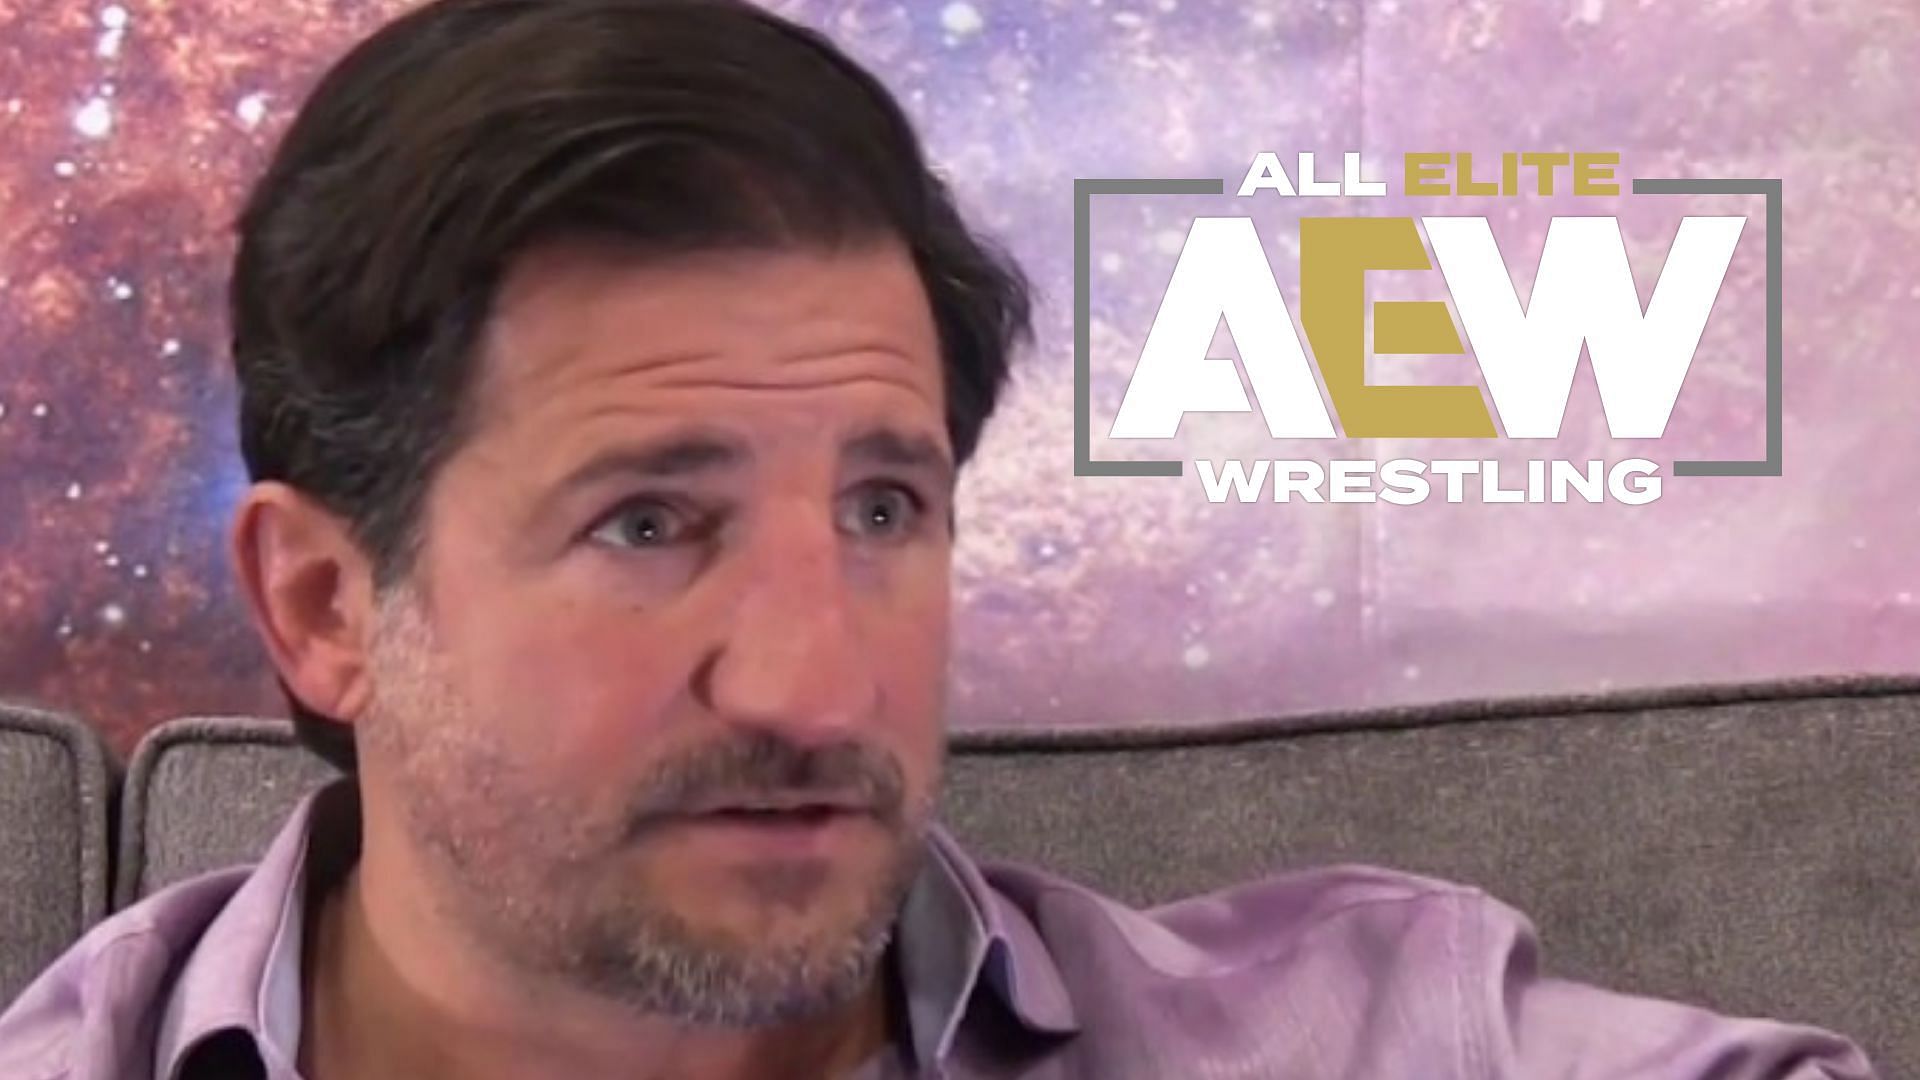 Disco Inferno has defended his controversial tweet and a recent AEW promo